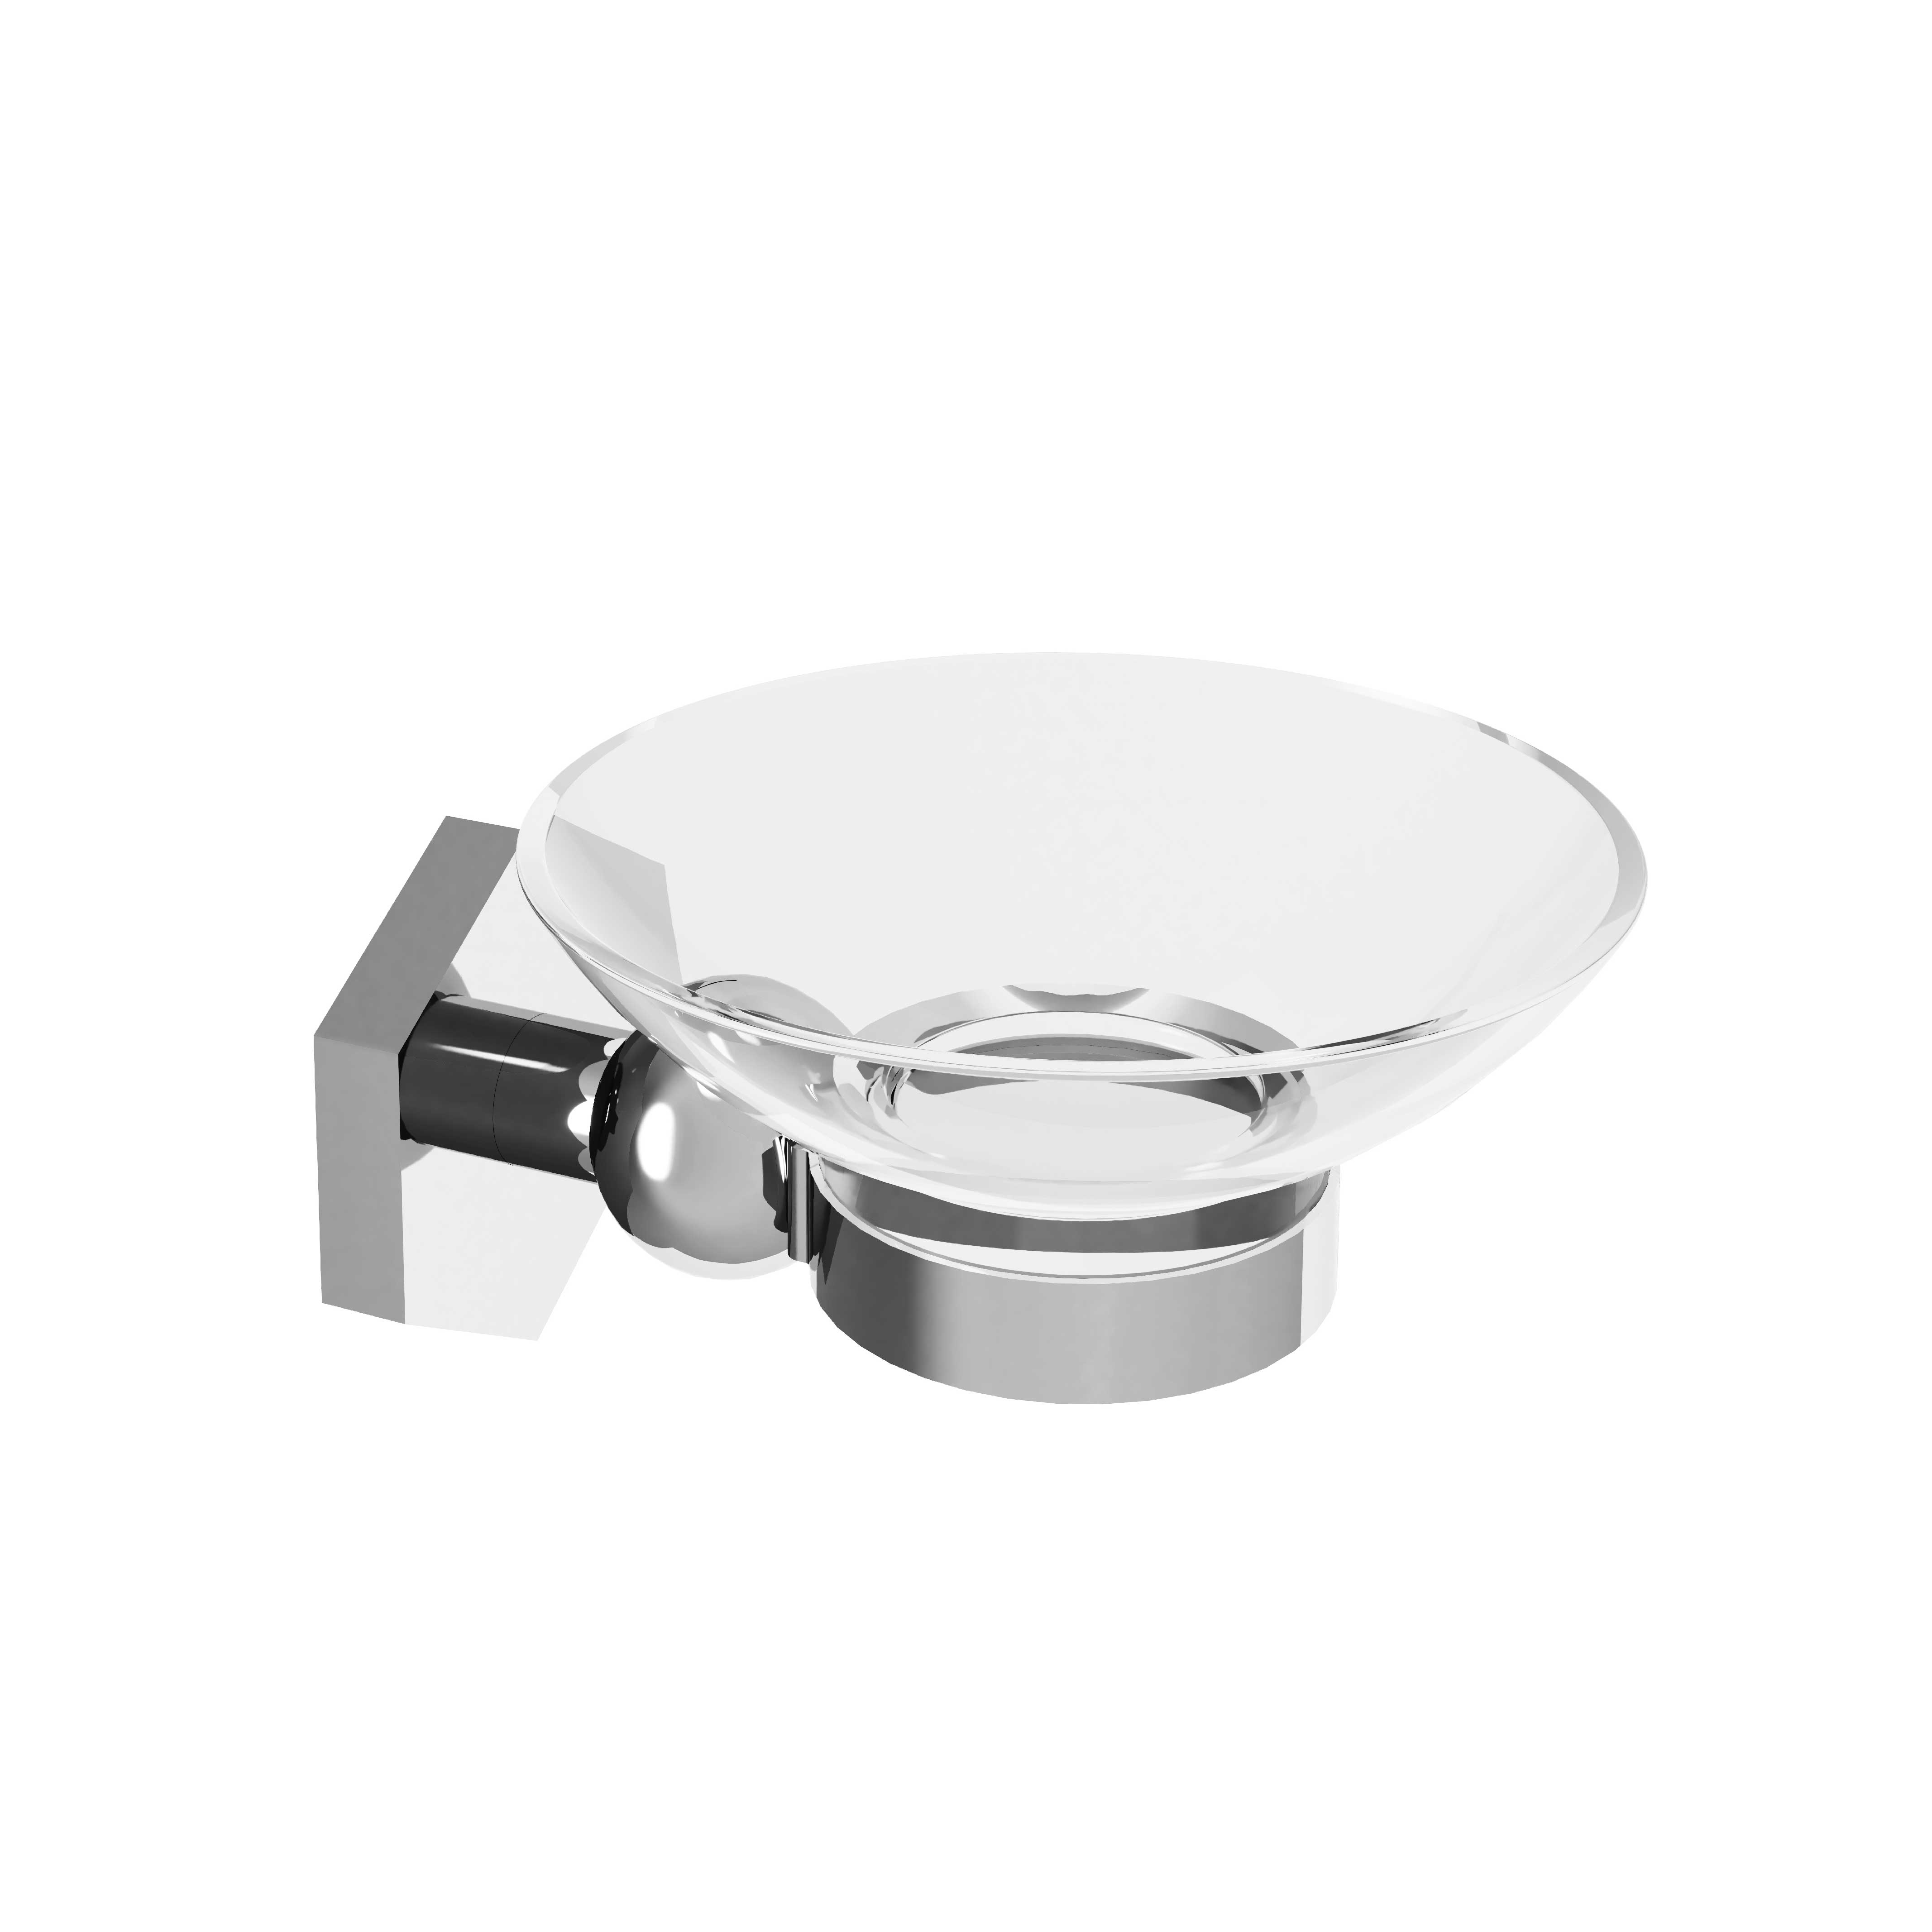 M38-515 Wall mounted soap dish holder